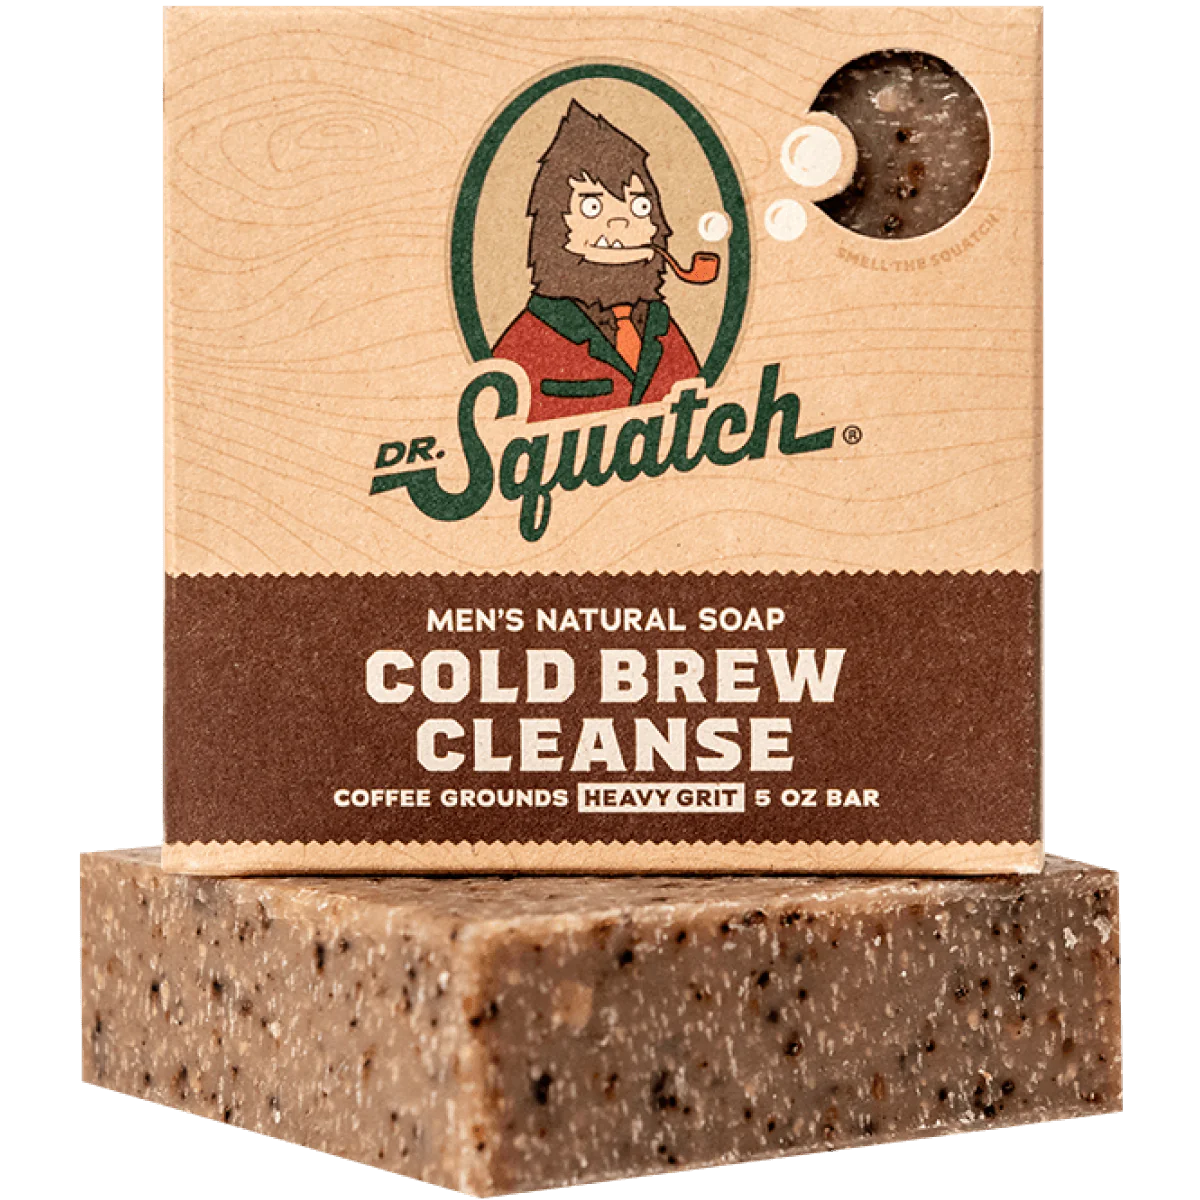 Dr. Squatch - Natural Bar Soap - Frosty Peppermint - Limited Scent - 5 oz.